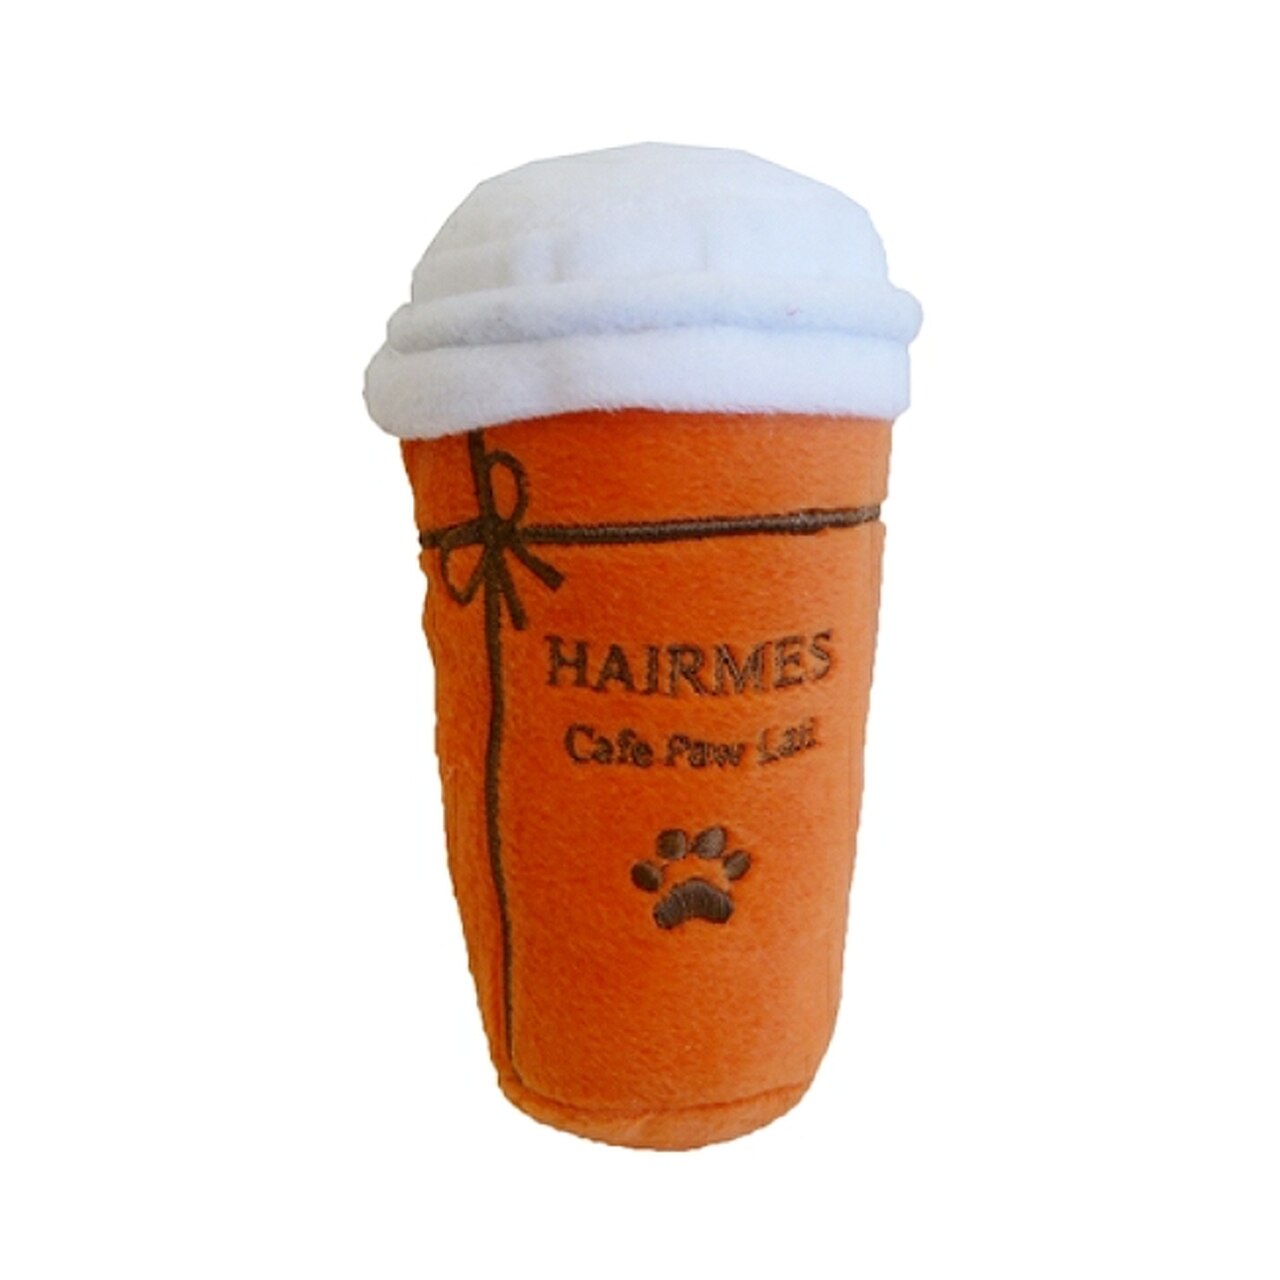 Hairmes Cafe PAW Lait